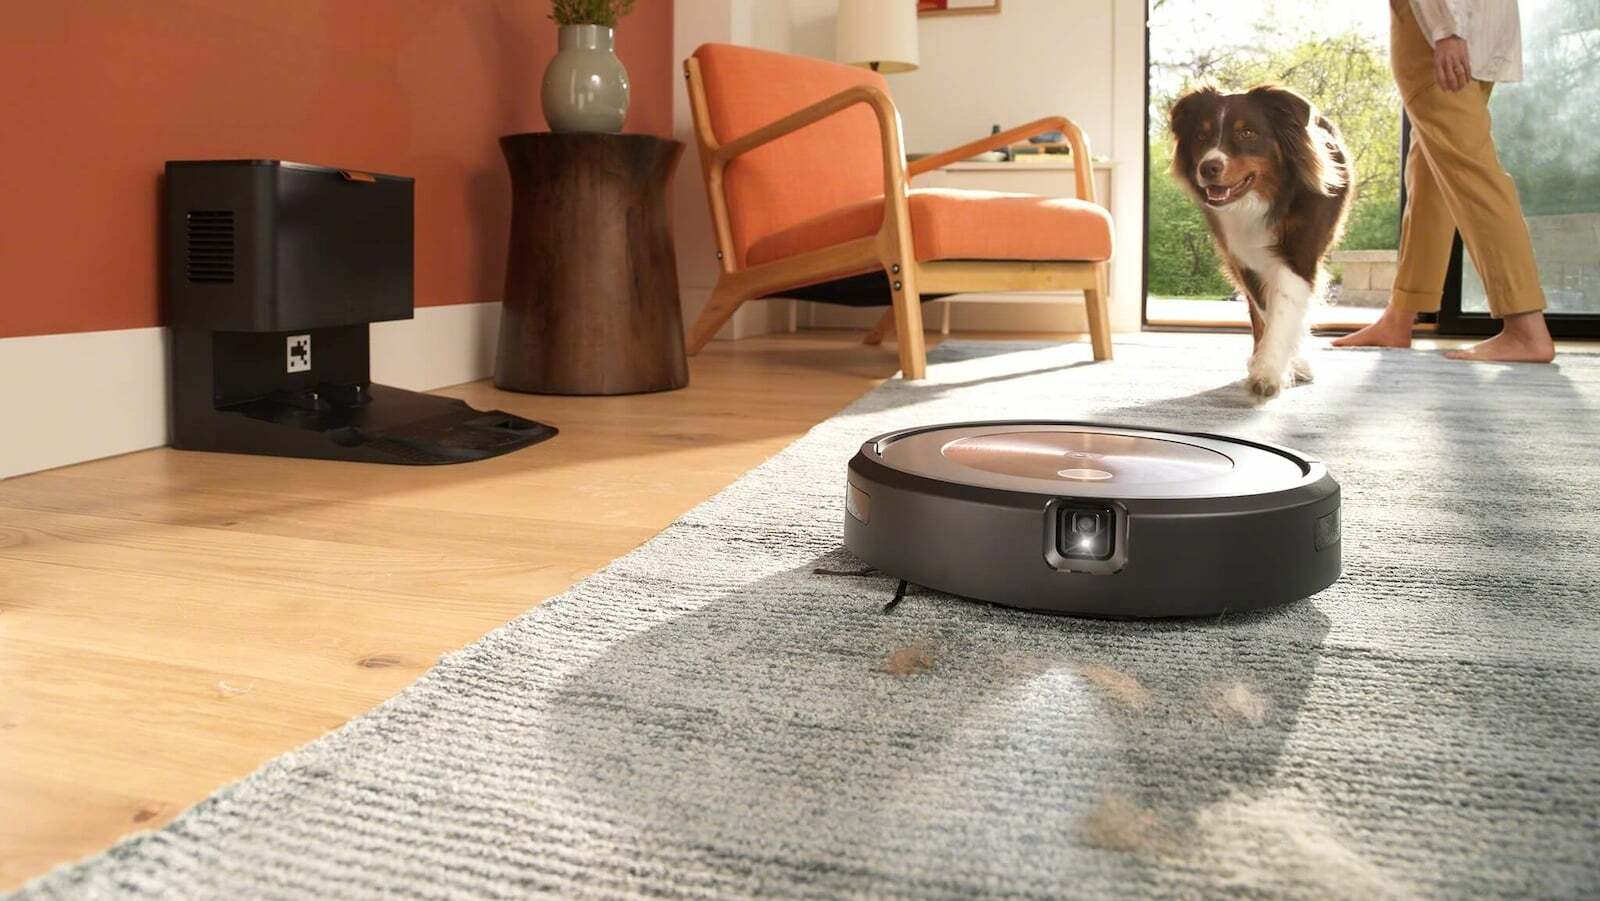 Roomba robot vacuum cleaning rug with self-empty dock, dog, person, and furniture in background